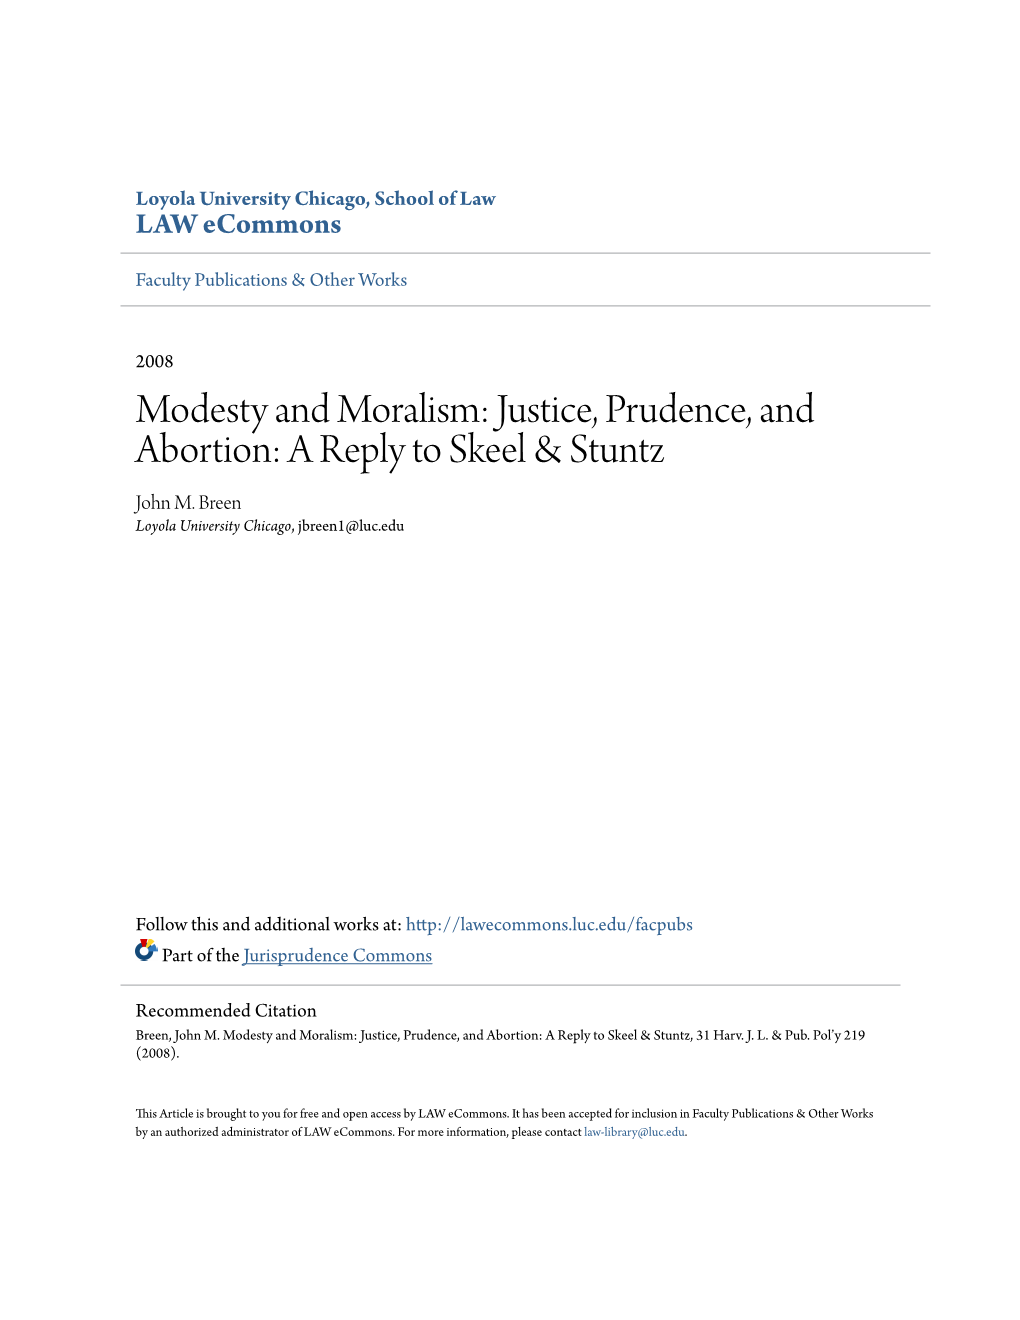 Modesty and Moralism: Justice, Prudence, and Abortion: a Reply to Skeel & Stuntz